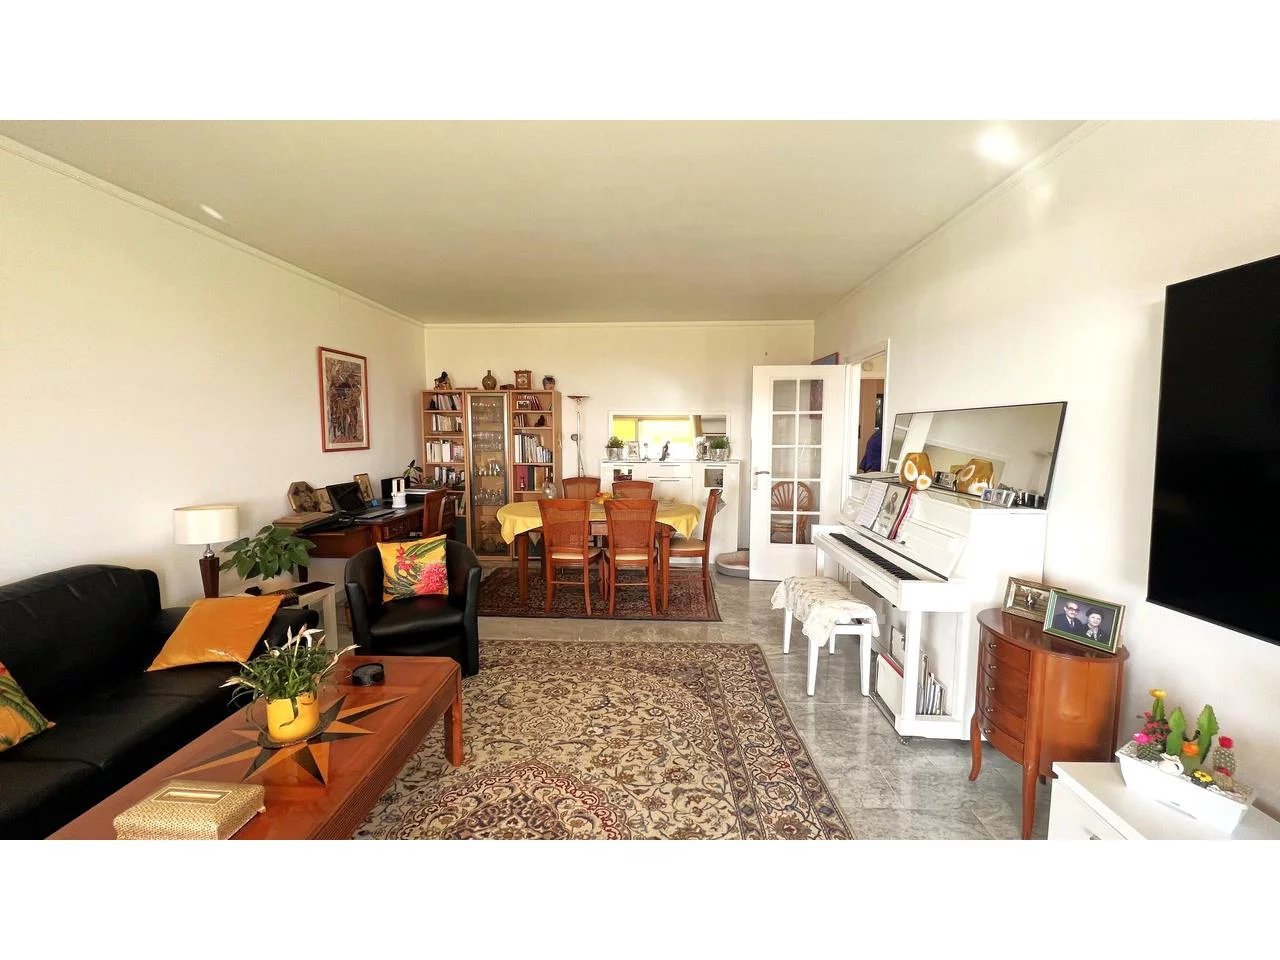 Appartement  2 Rooms 59.73m2  for sale   439 000 €